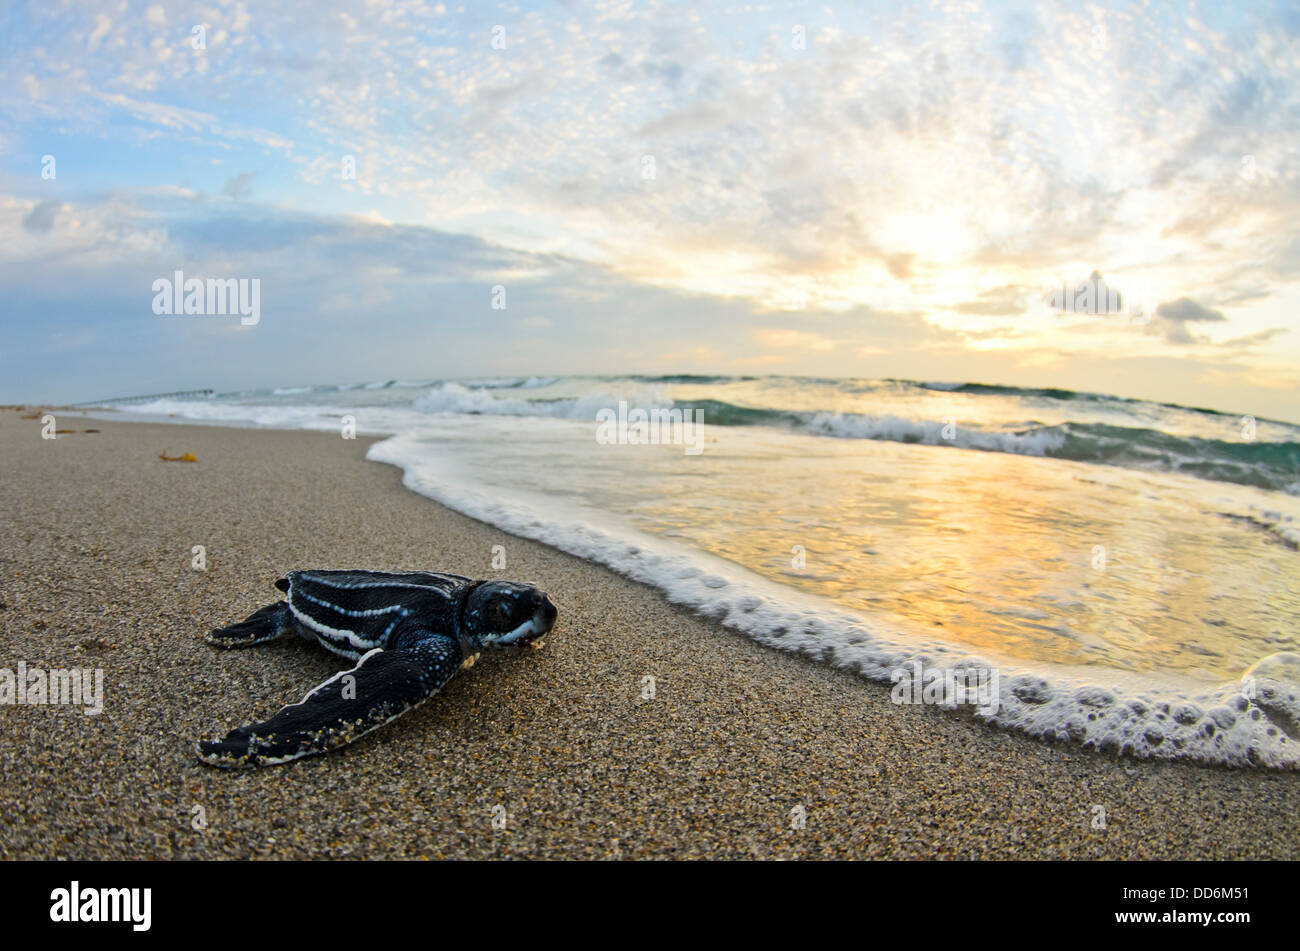 This is a photo of a leatherback sea turtle hatchling making its way out into the ocean one morning on Juno Beach Florida. Stock Photo